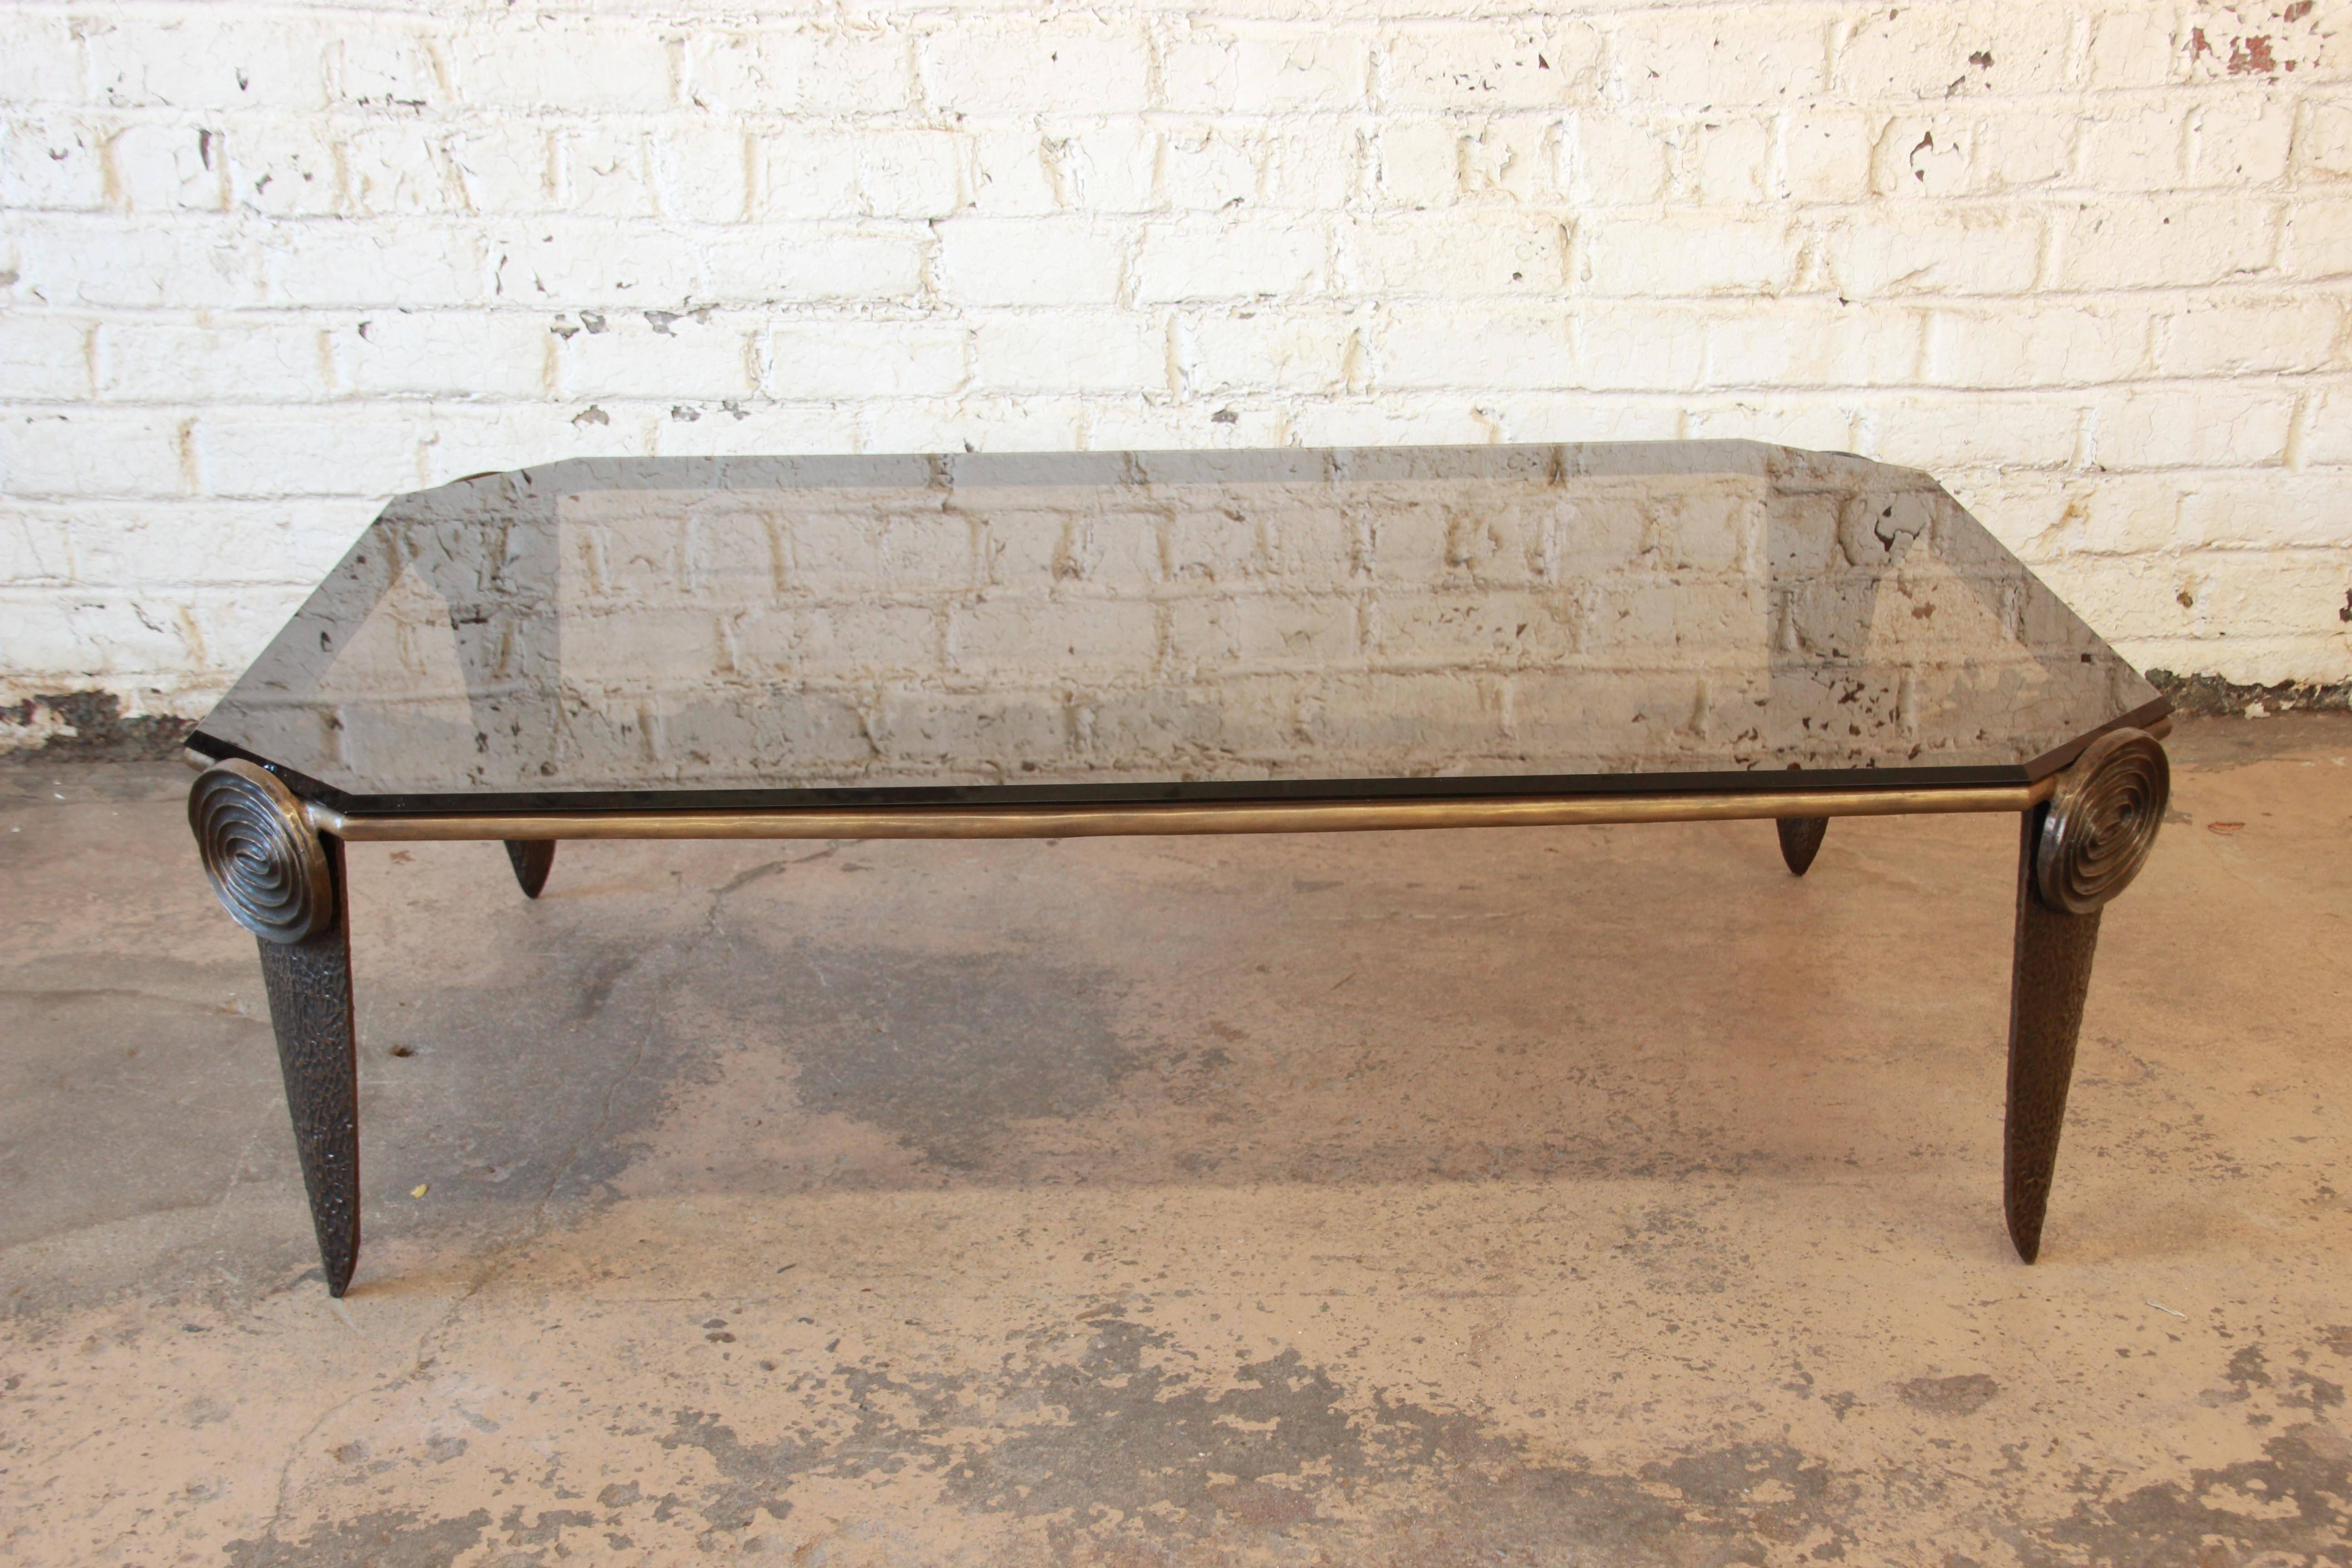 Exceptional and large Brutalist style coffee table in the manner of Adrian Pearsall. The table features a unique modern design on the cast solid bronze base and a beautiful beveled smoked glass table top.

A foundry mark is present on the bottom